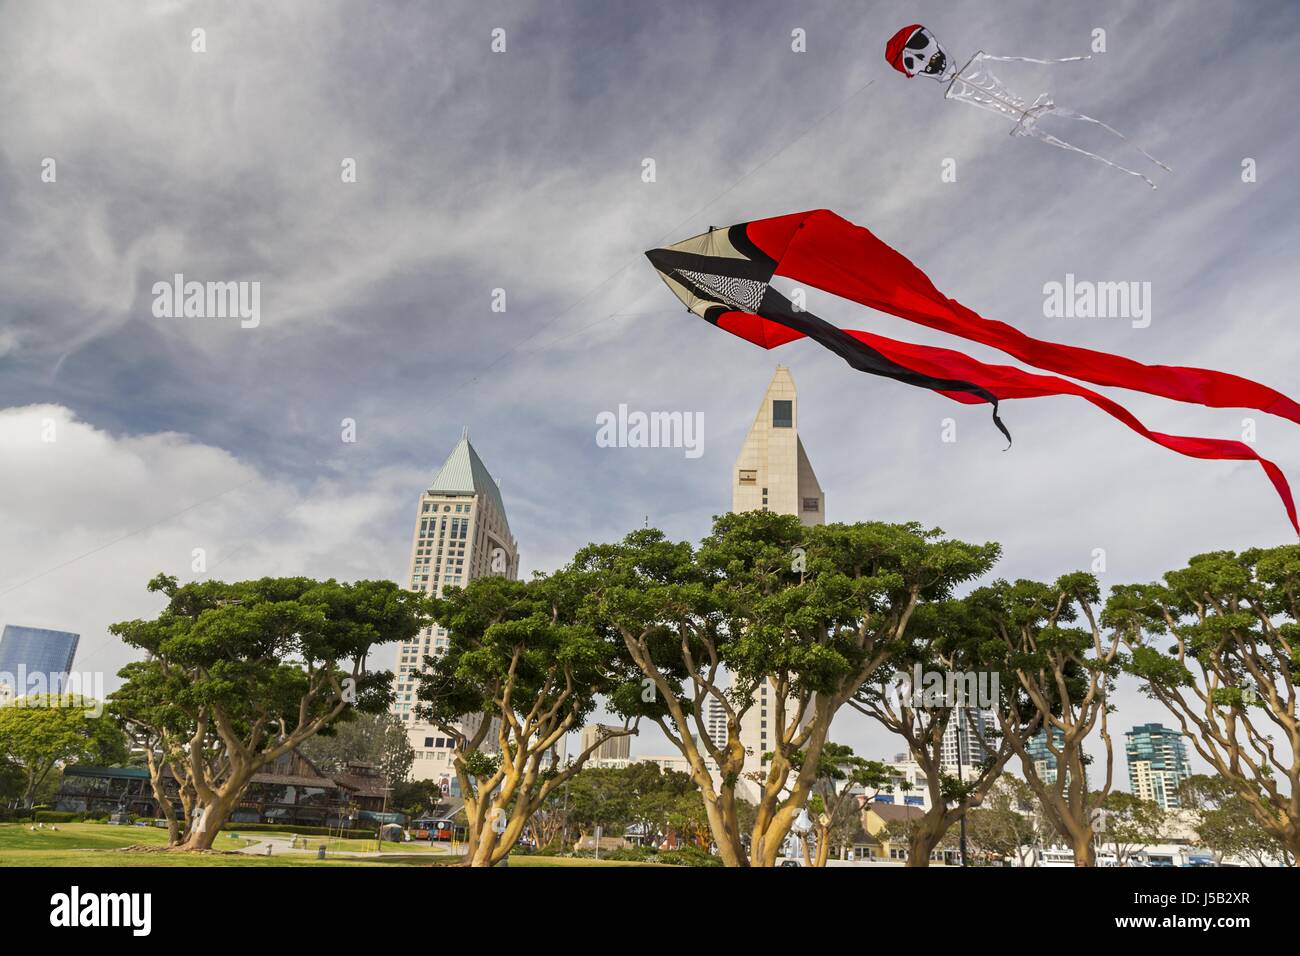 Windy Day Kite Flying in Seaport Village near San Diego California Harbor with Manzanita Trees and Urban Highrise City Center Buildings on Skyline Stock Photo